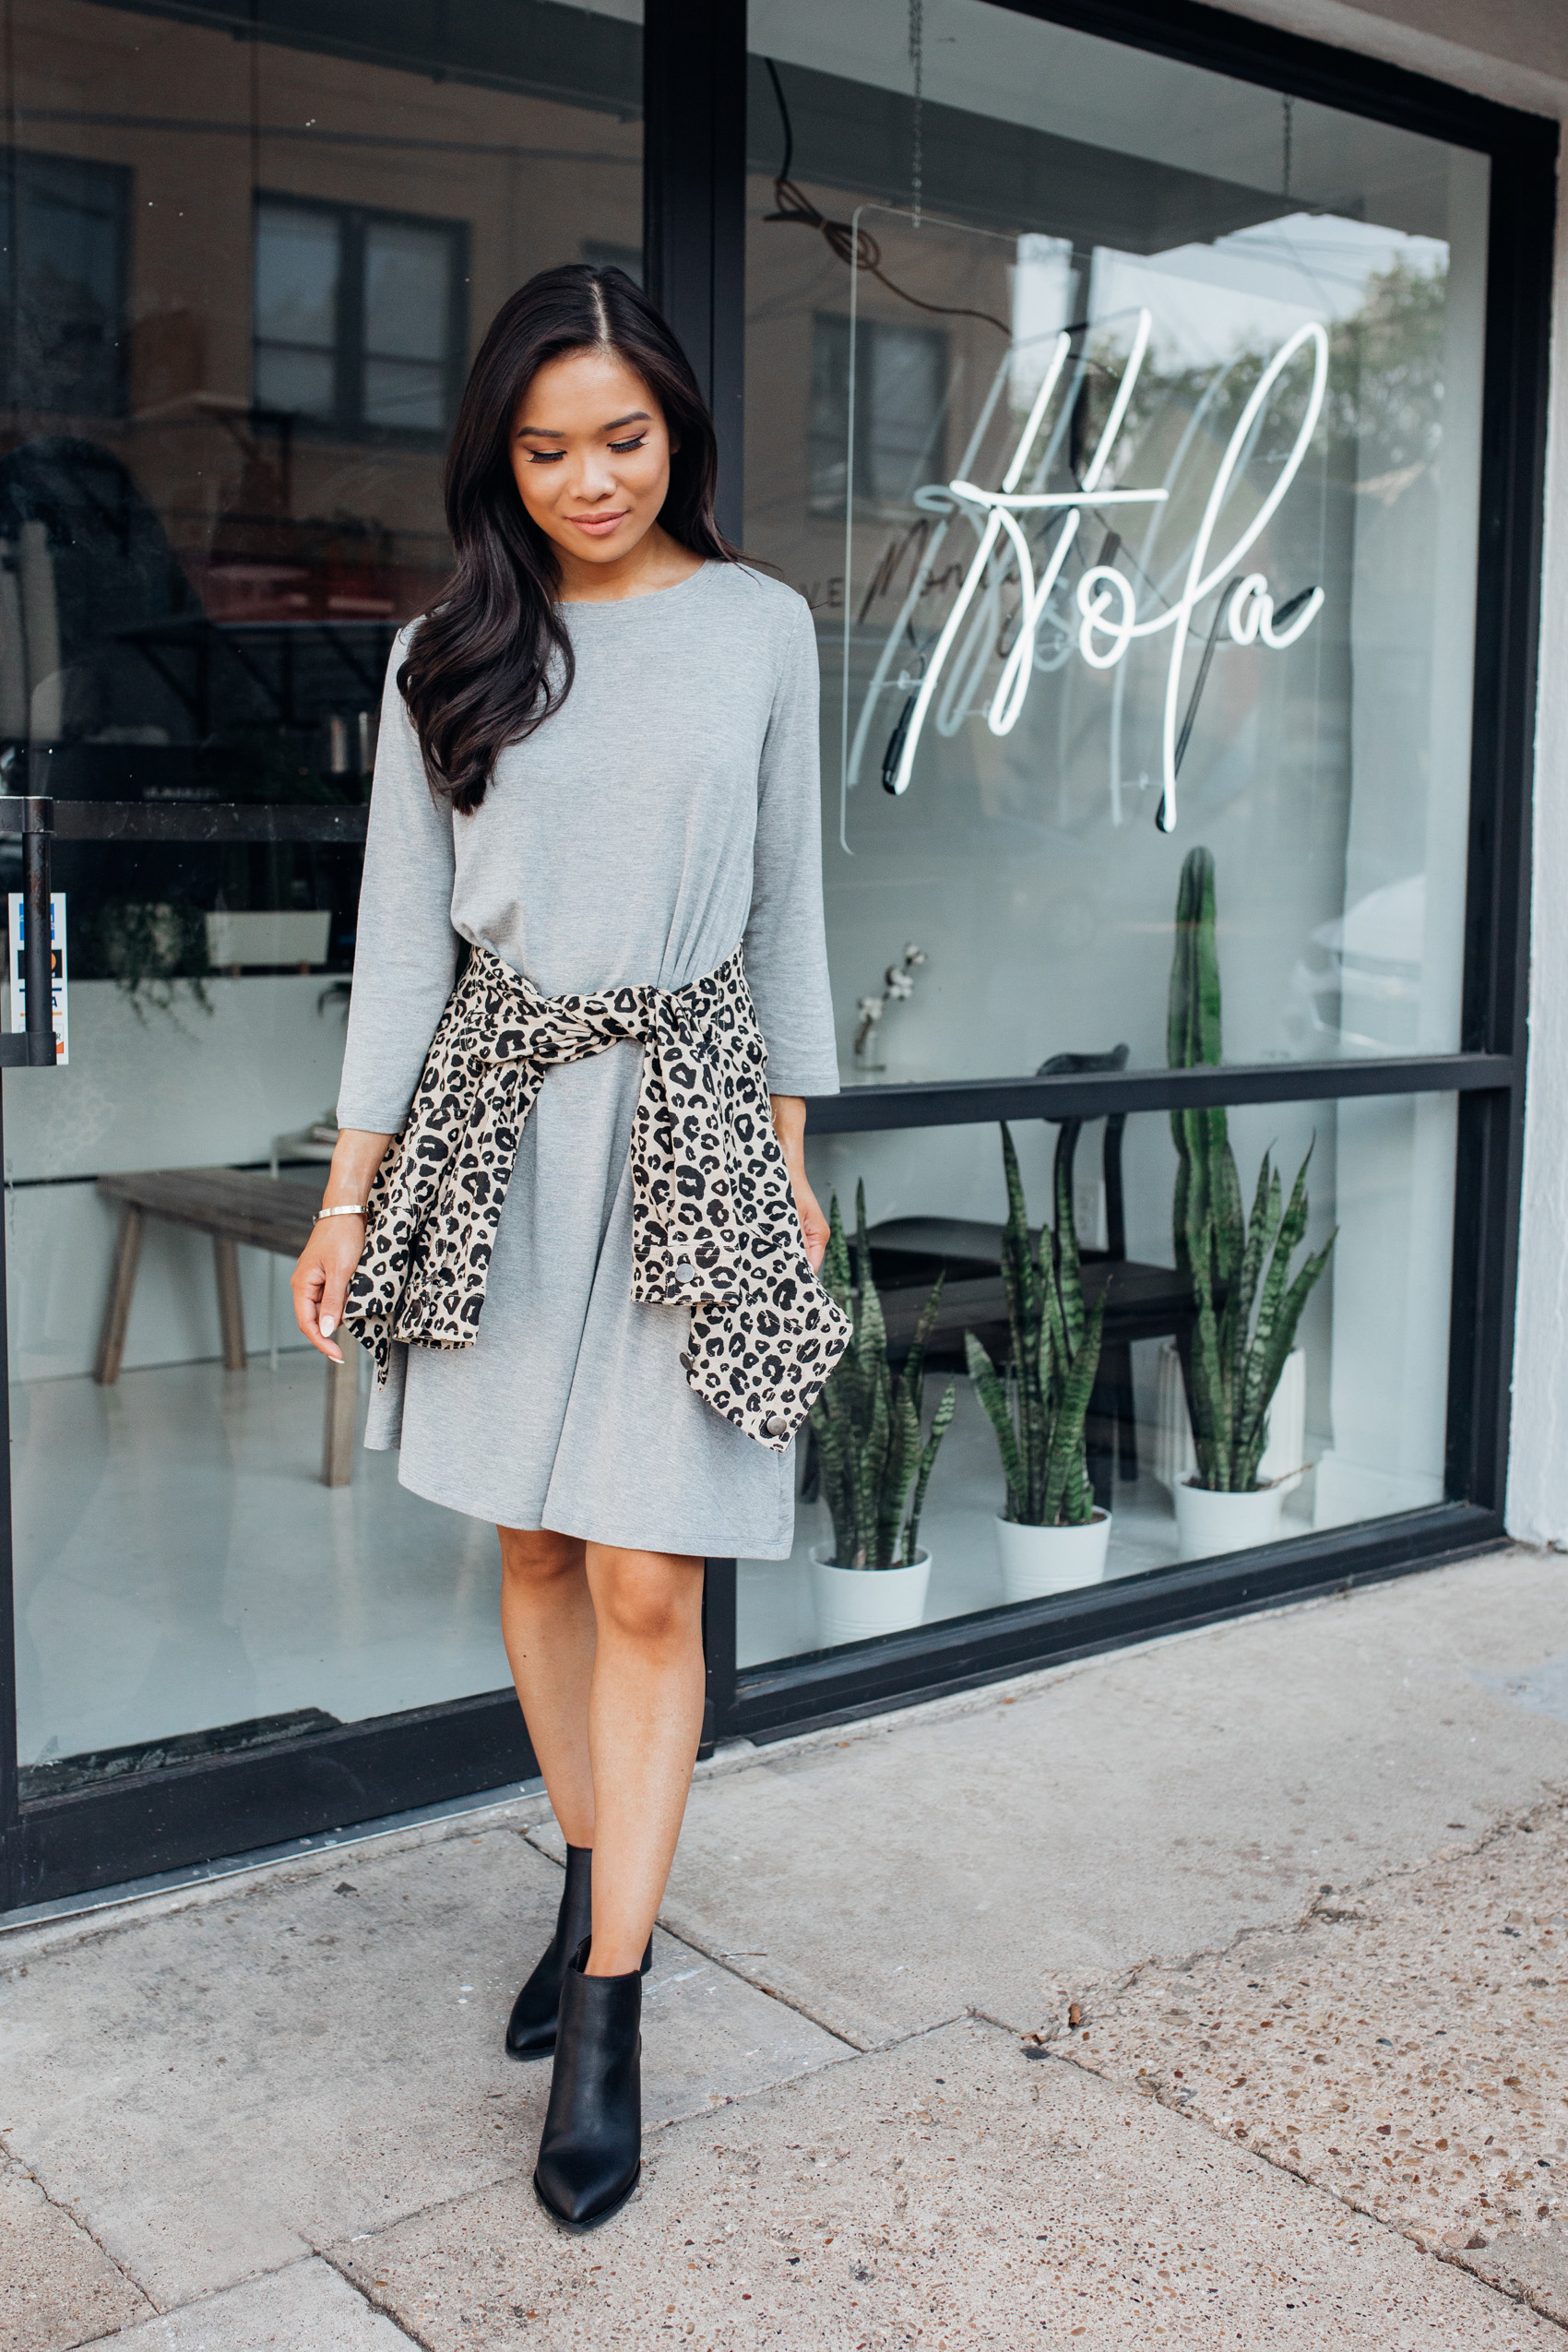 Affordable fall fashion with Walmart wearing a gray shirt dress, leopard jacket and black booties for a fall outfit